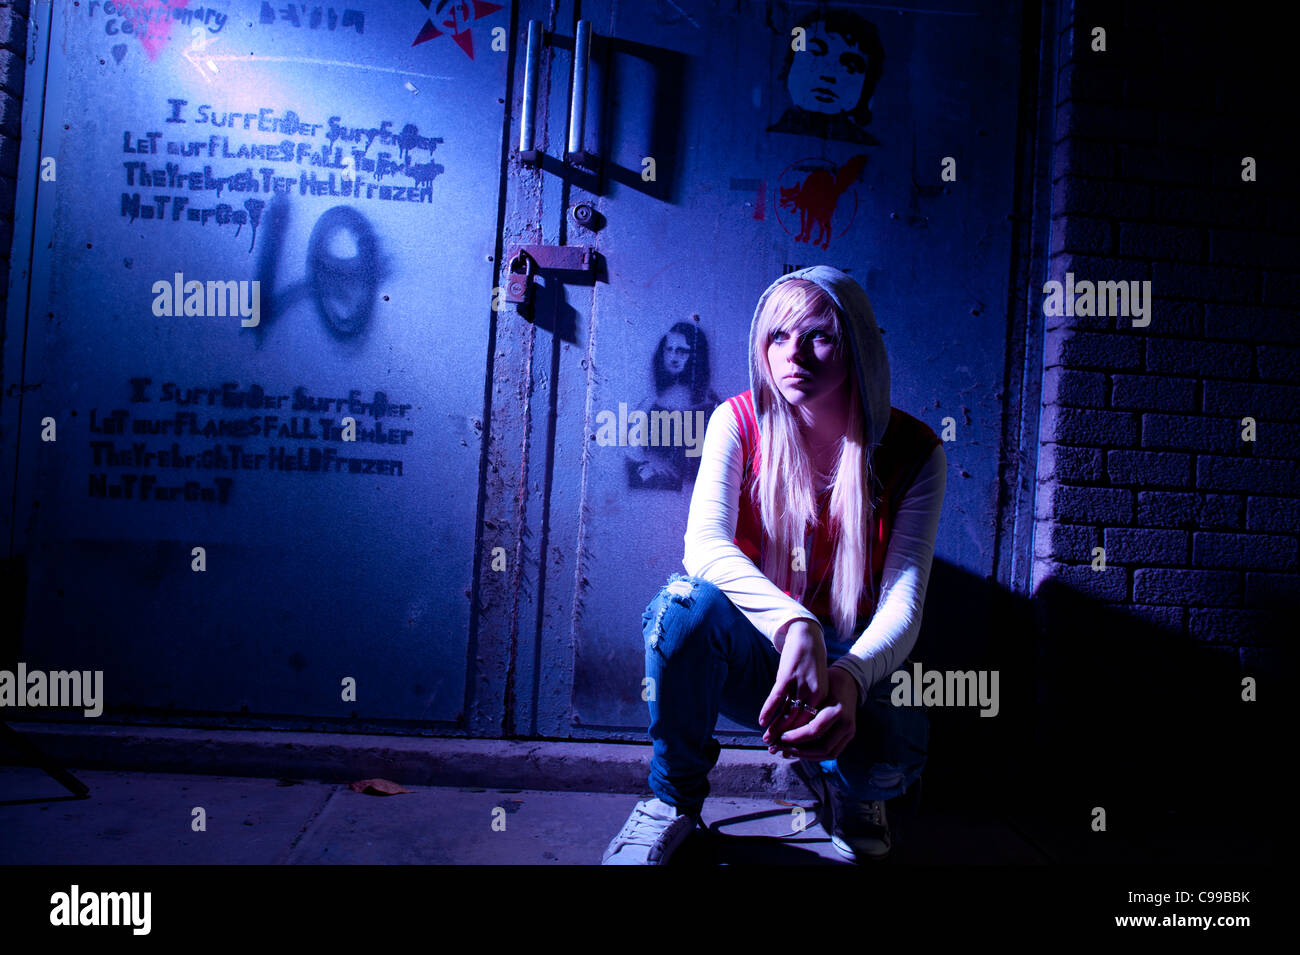 A 16 year old blonde haired slim teenage girl, alone in a dingy urban location, UK Stock Photo